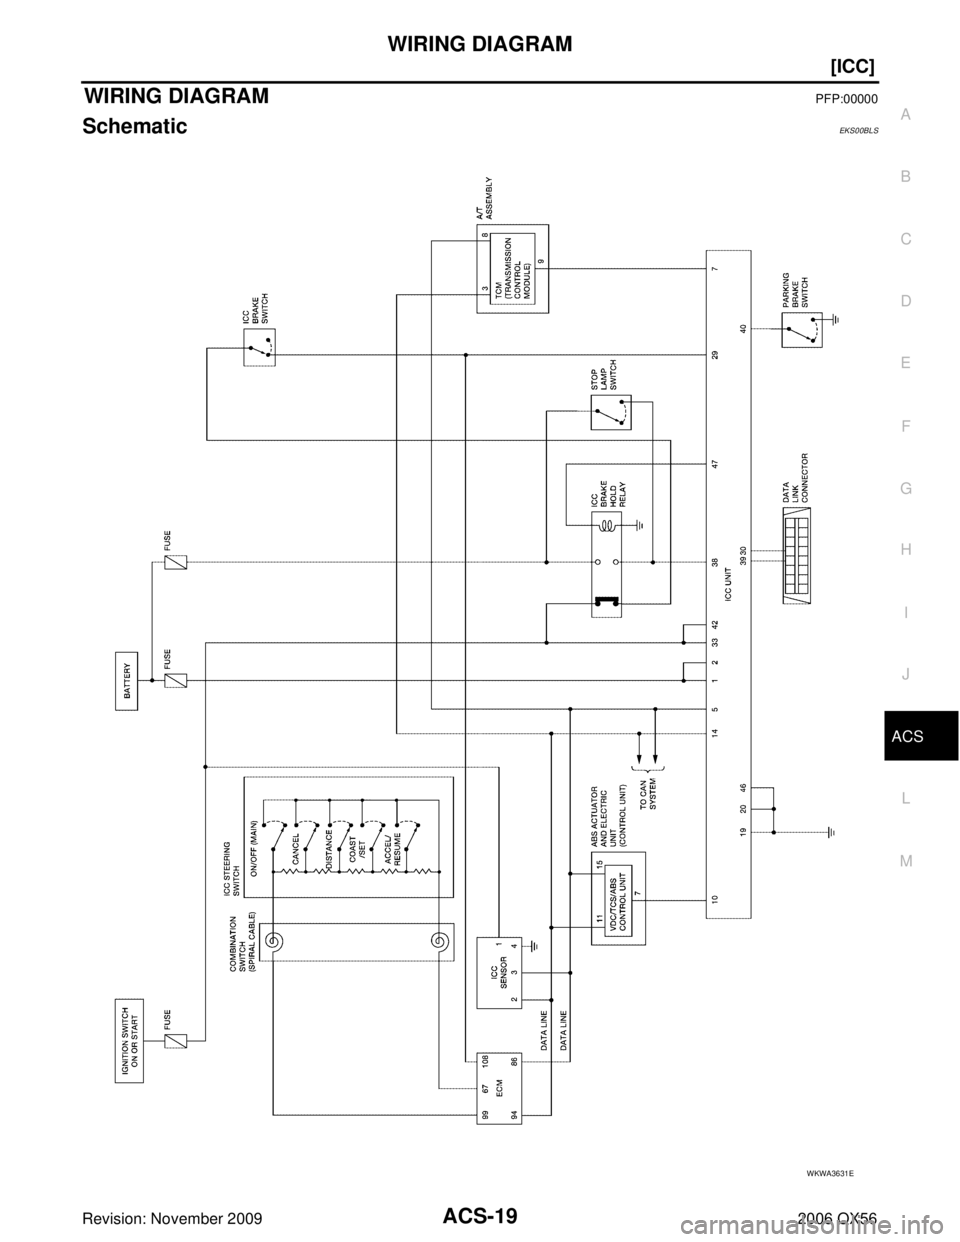 INFINITI QX56 2006  Factory Owners Guide WIRING DIAGRAMACS-19
[ICC]
C
DE
F
G H
I
J
L
M A
B
ACS
Revision: November 2009 2006 QX56
WIRING DIAGRAMPFP:00000
SchematicEKS00BLS
WKWA3631E 